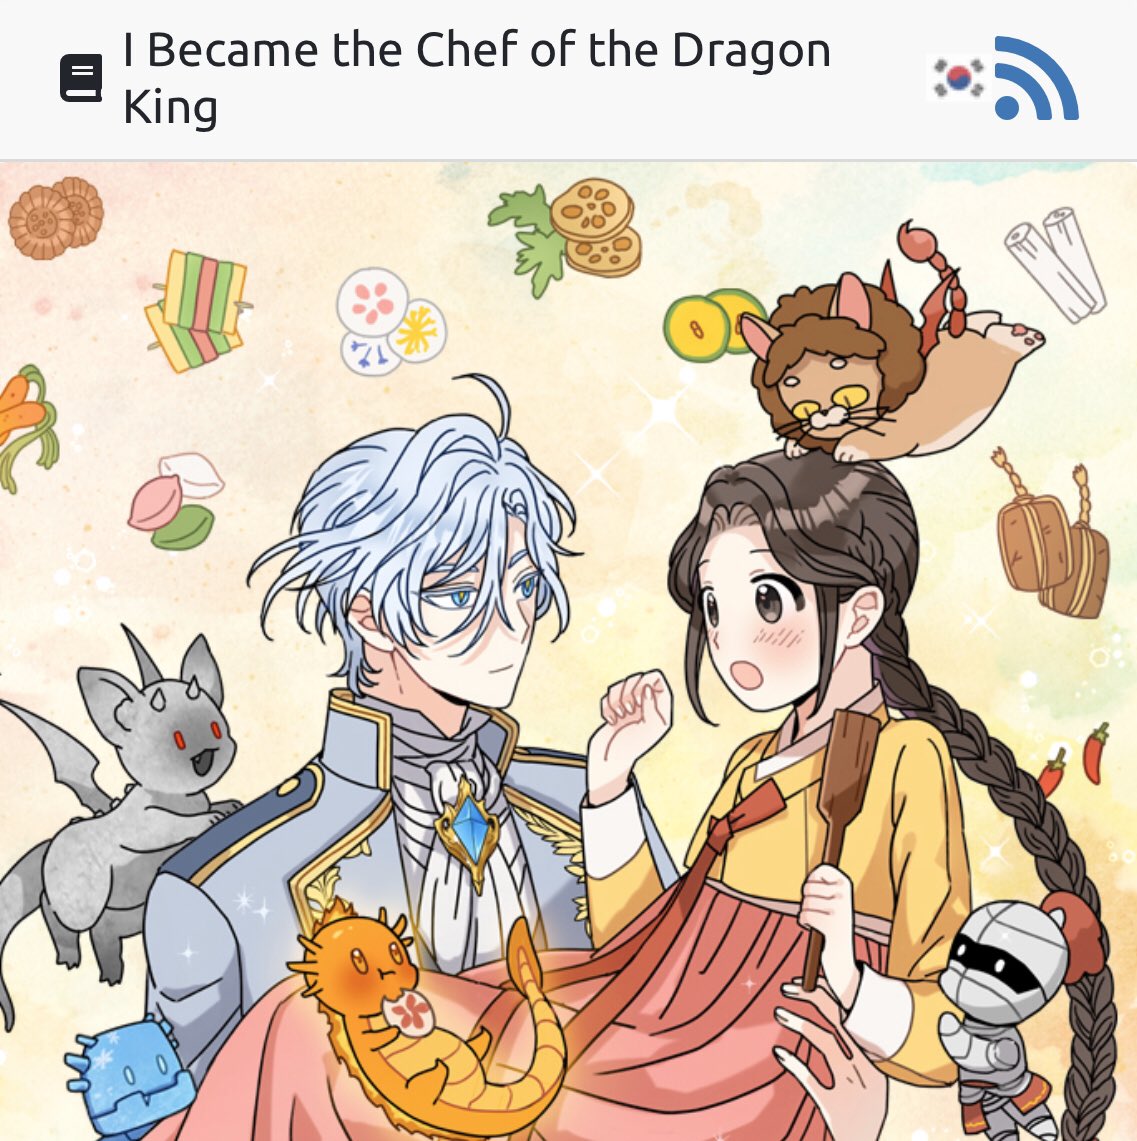 A young korean girl was sacrificed by her village to the dragon king but somehow she was sent to medieval europe and dropped on gold piles in the lair of the infamous white dragon. The girl vowed to cook for him in exchange for her life and a cute slice-of-life began.